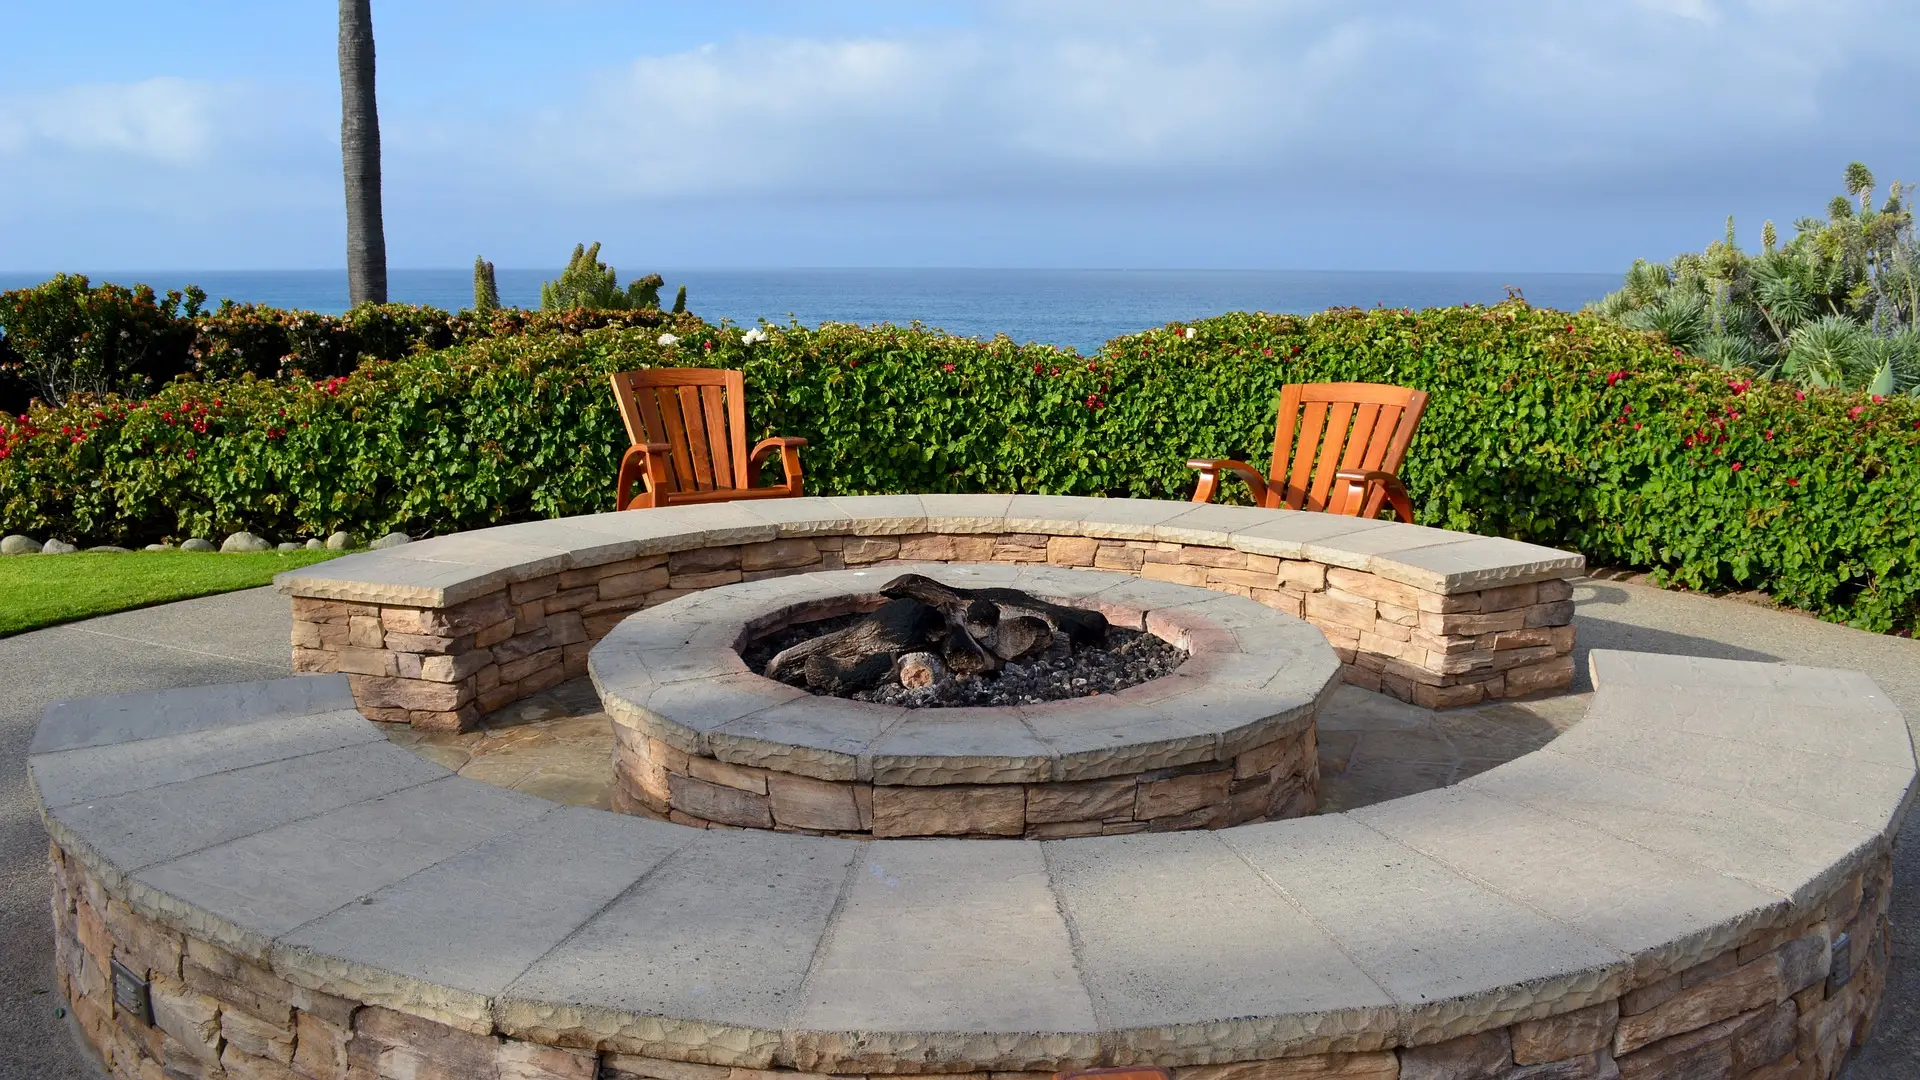 Can You Put A Fire Pit On Concrete, How To Build A Fire Pit On Concrete Slab